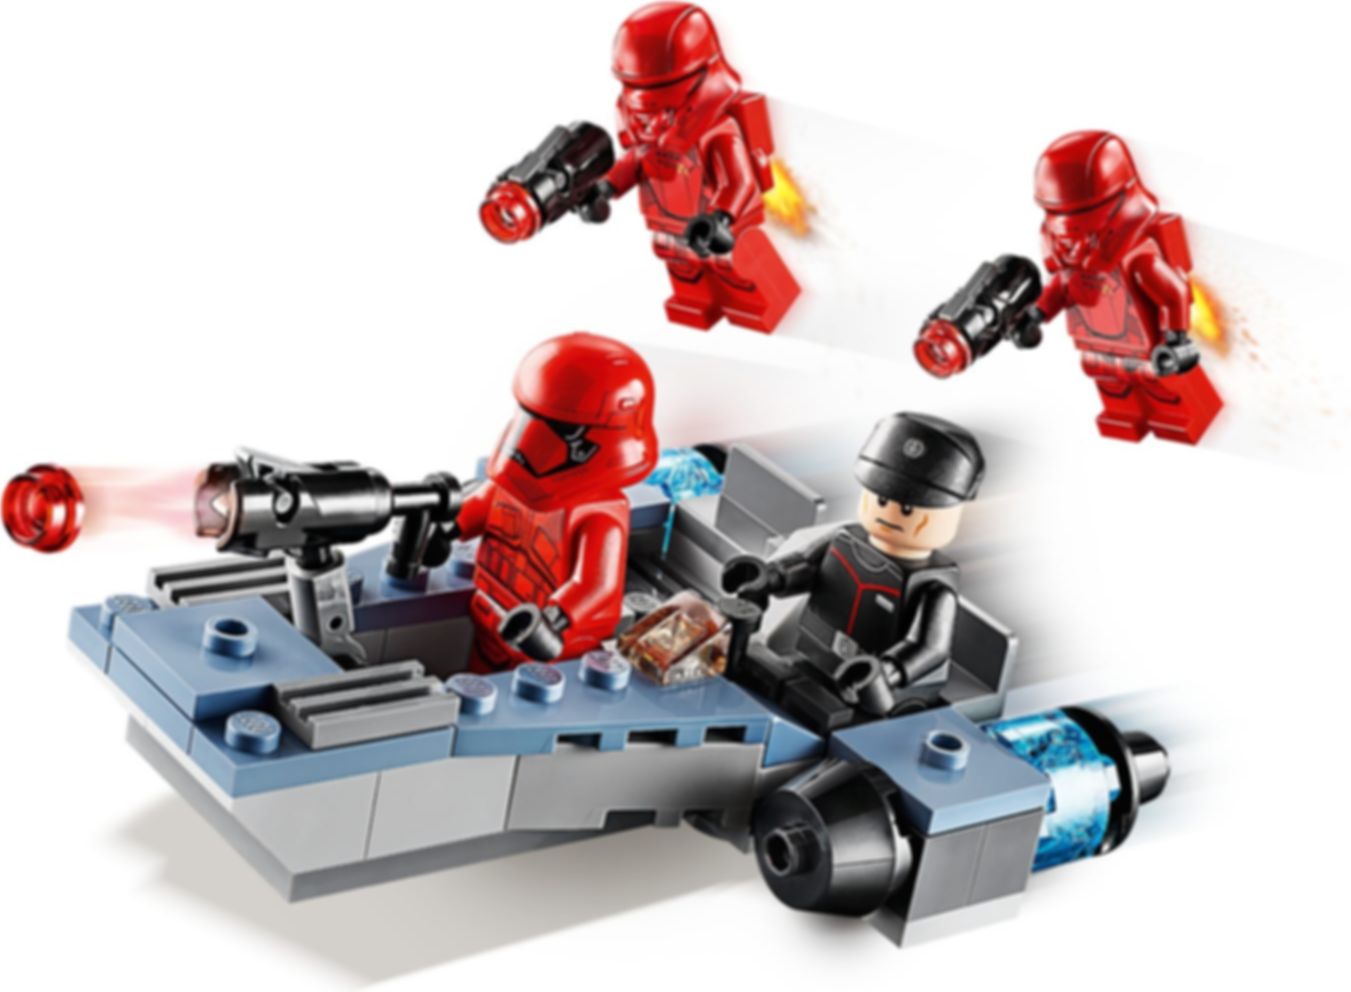 LEGO® Star Wars Sith Troopers™ Battle Pack speelwijze